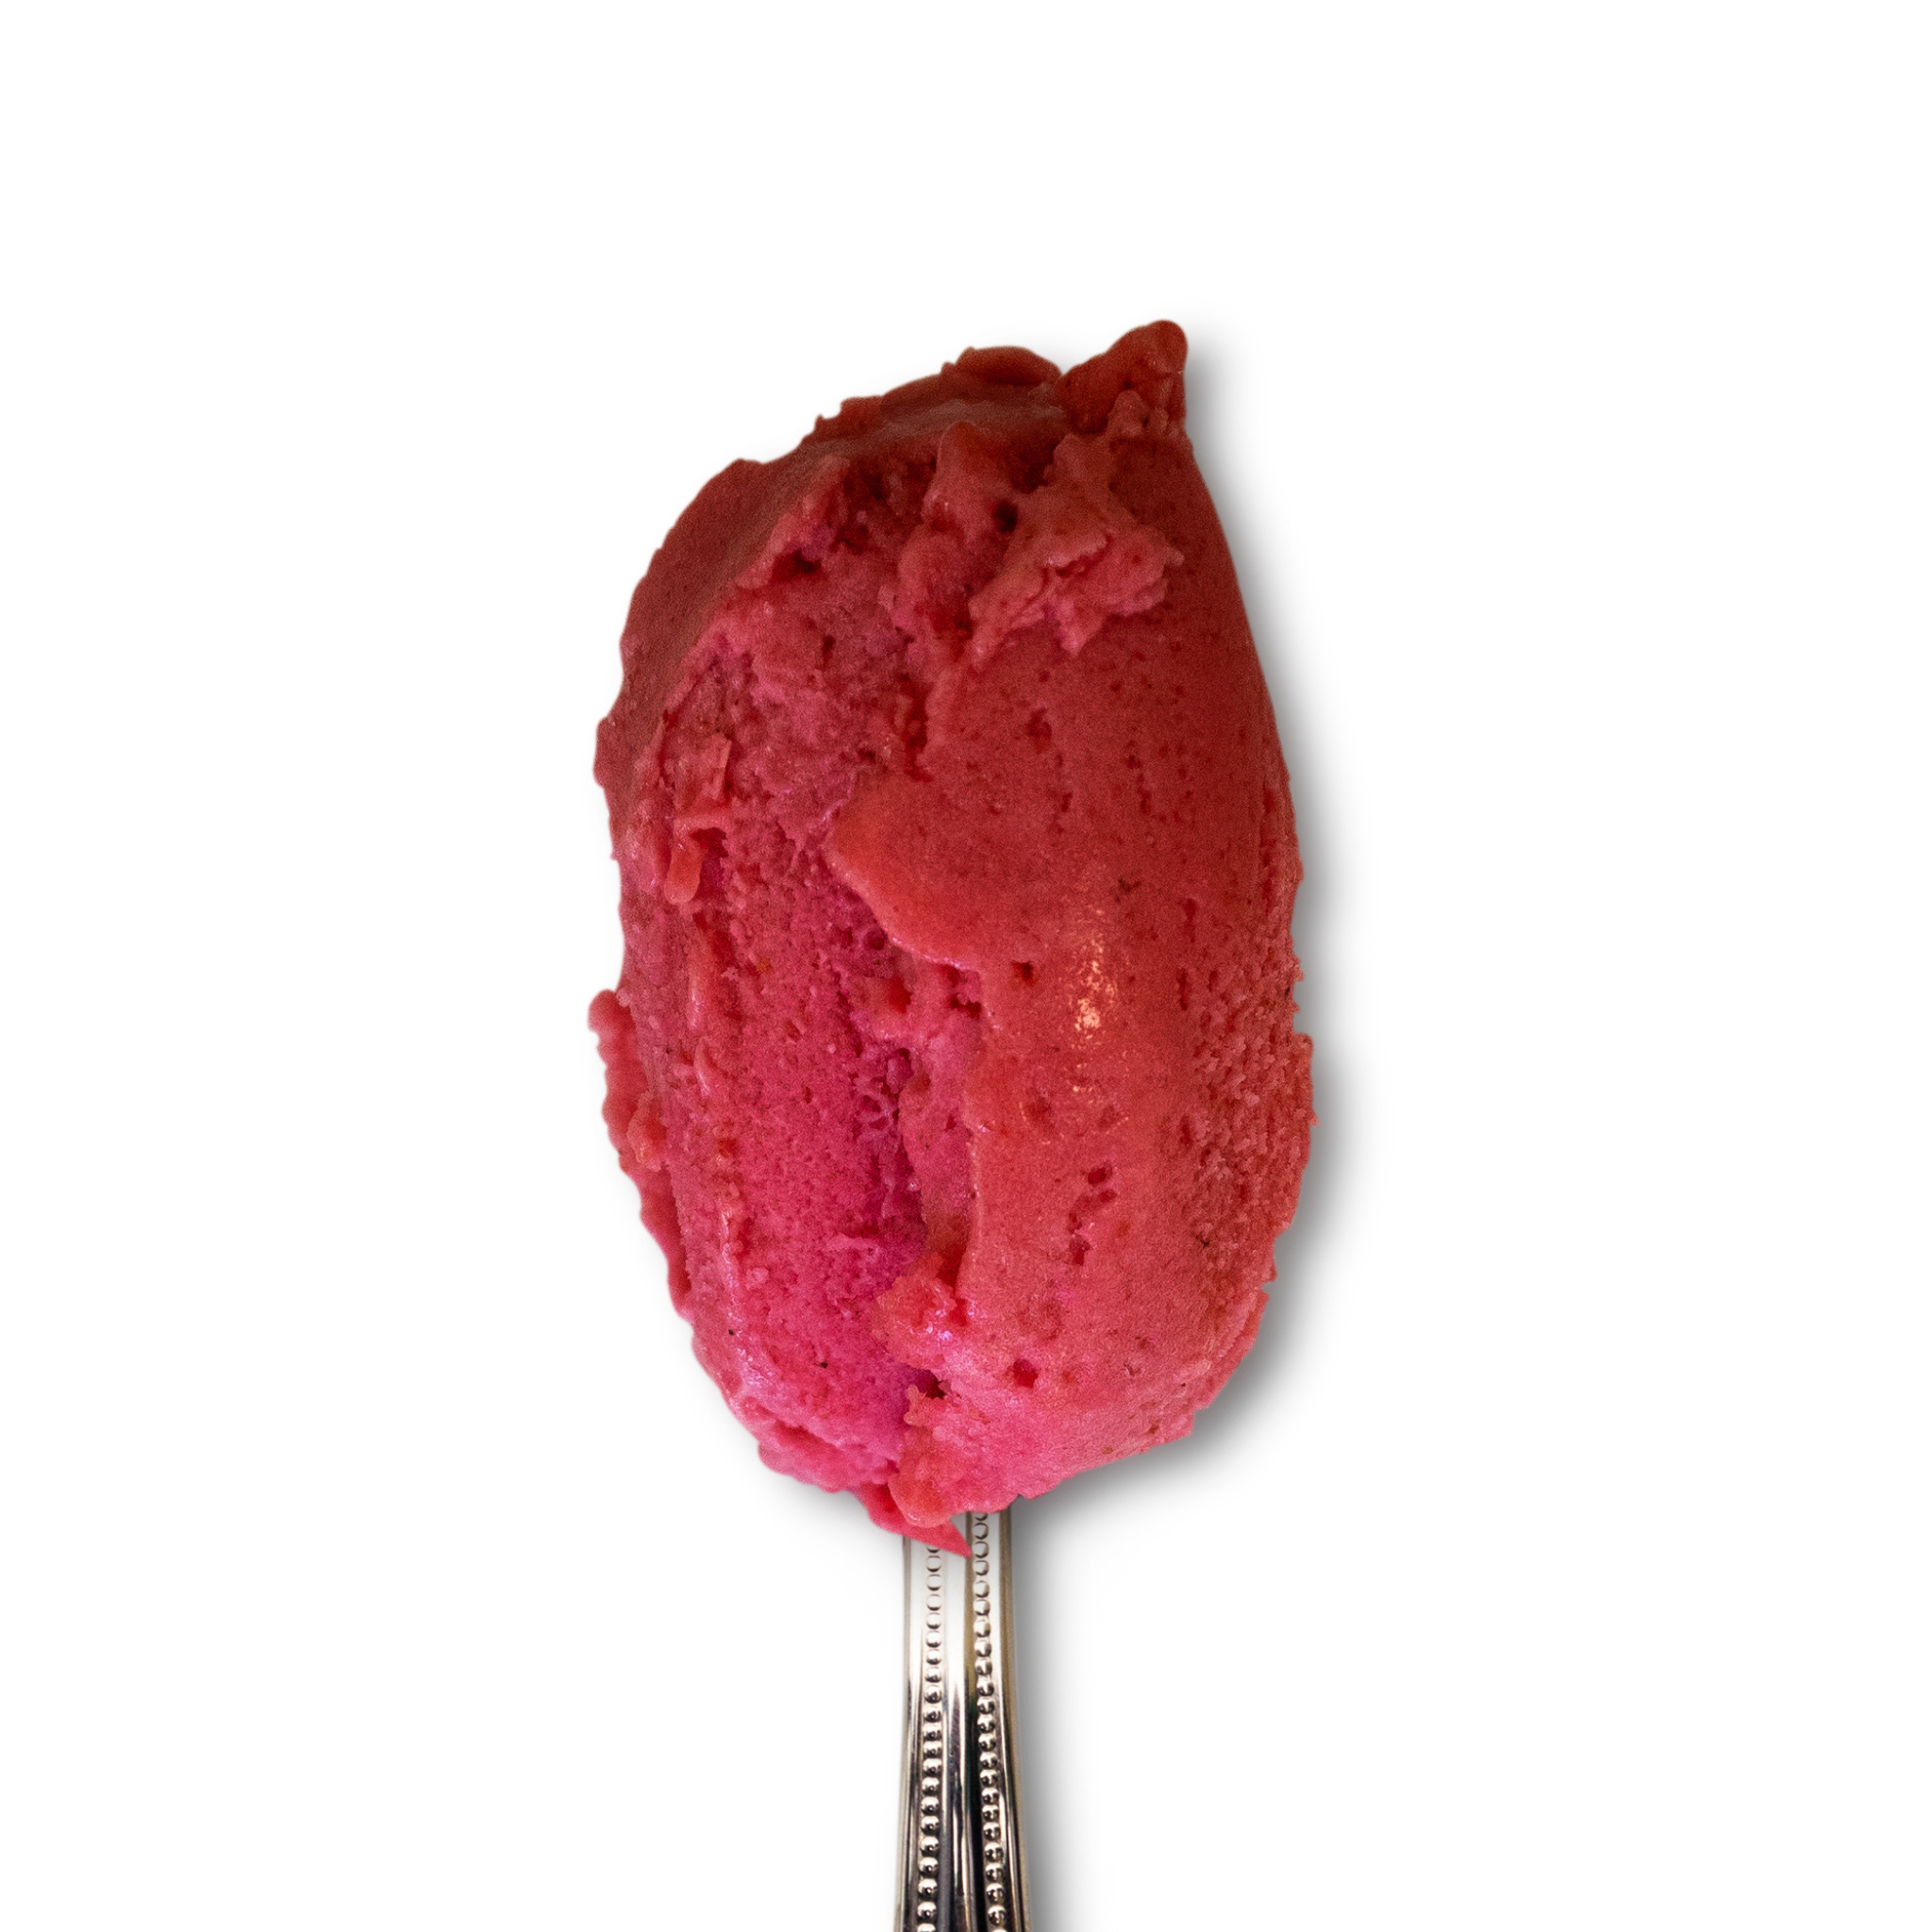 Ice Cream Cherry, Red Sorbet, Scoop, Black Slate Background Stock Photo,  Picture and Royalty Free Image. Image 53006491.